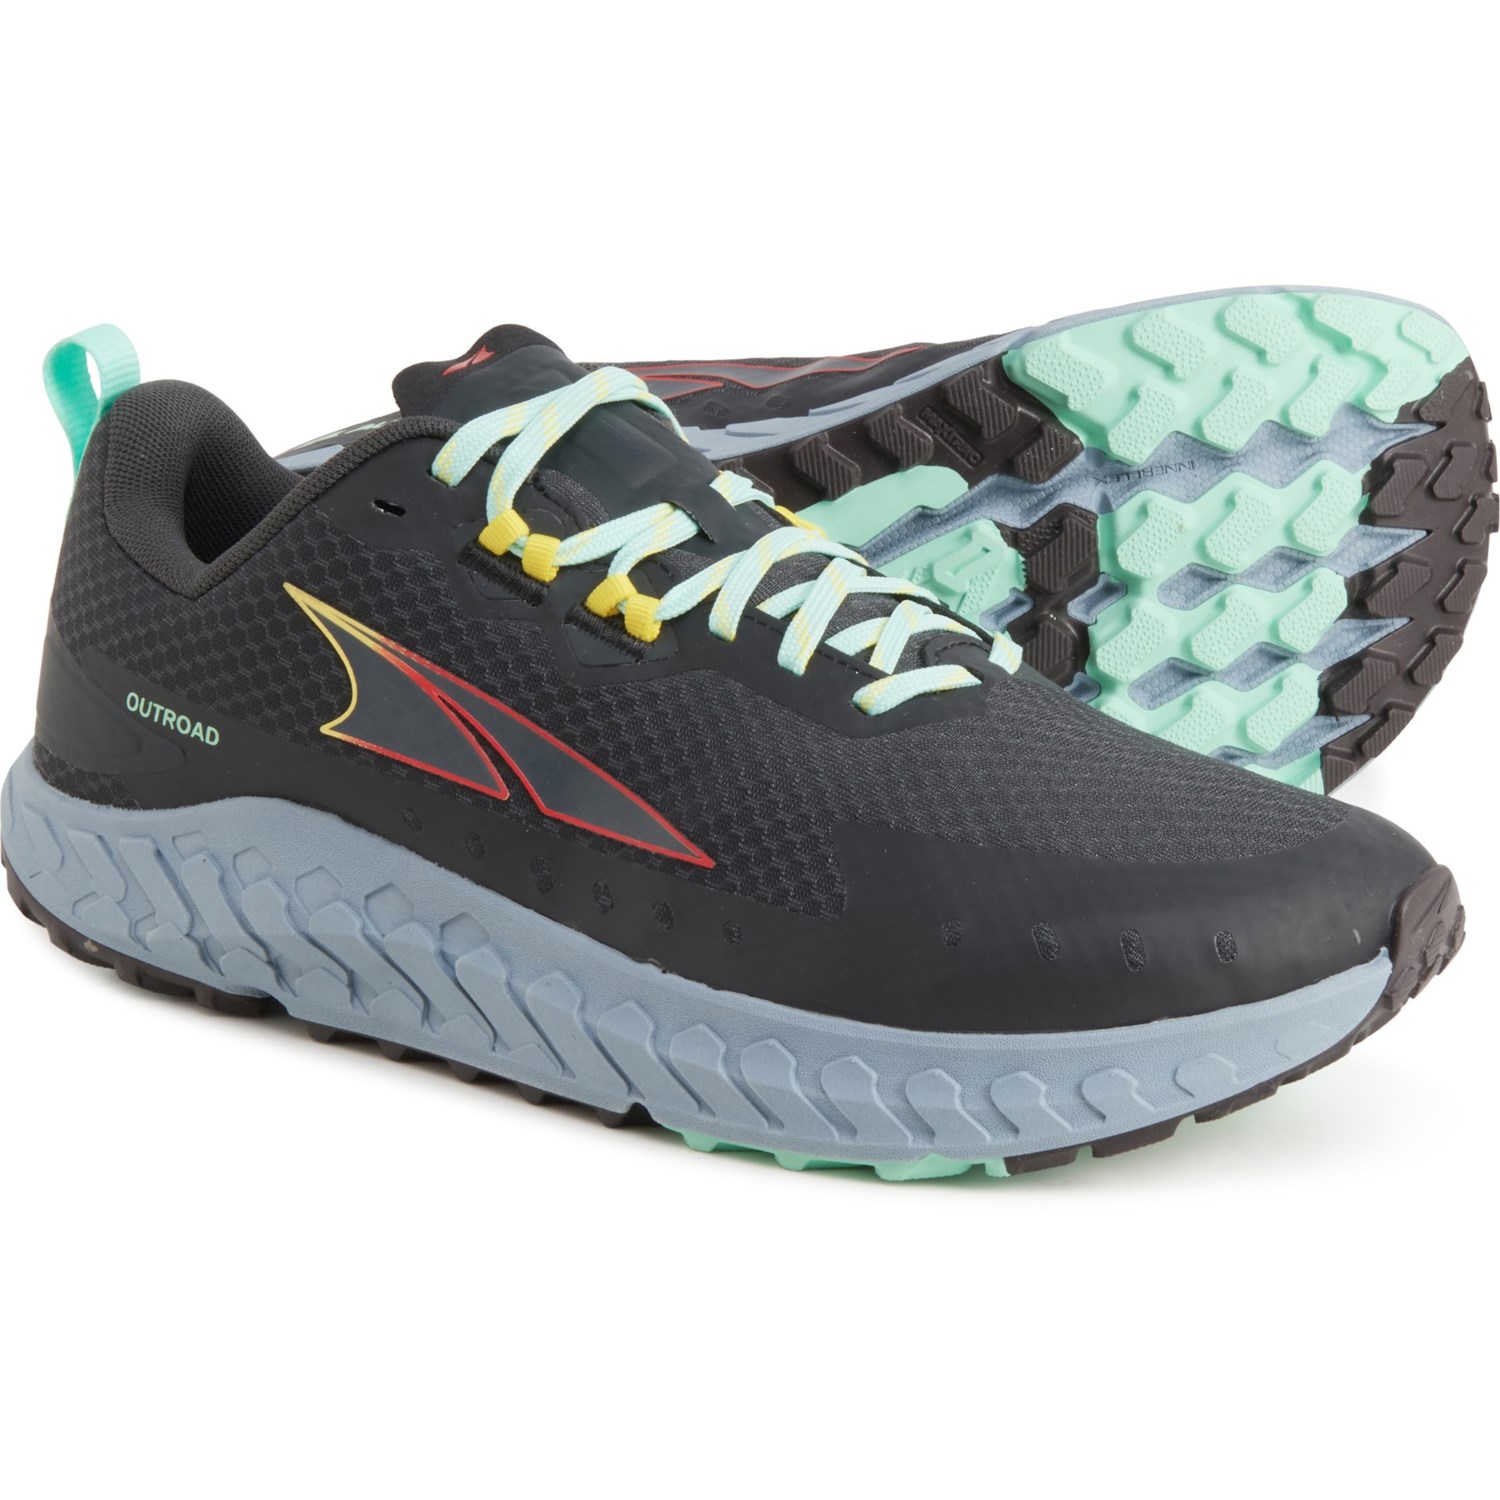 Altra Outroad Trail Running Shoes (For Men) - Save 40%